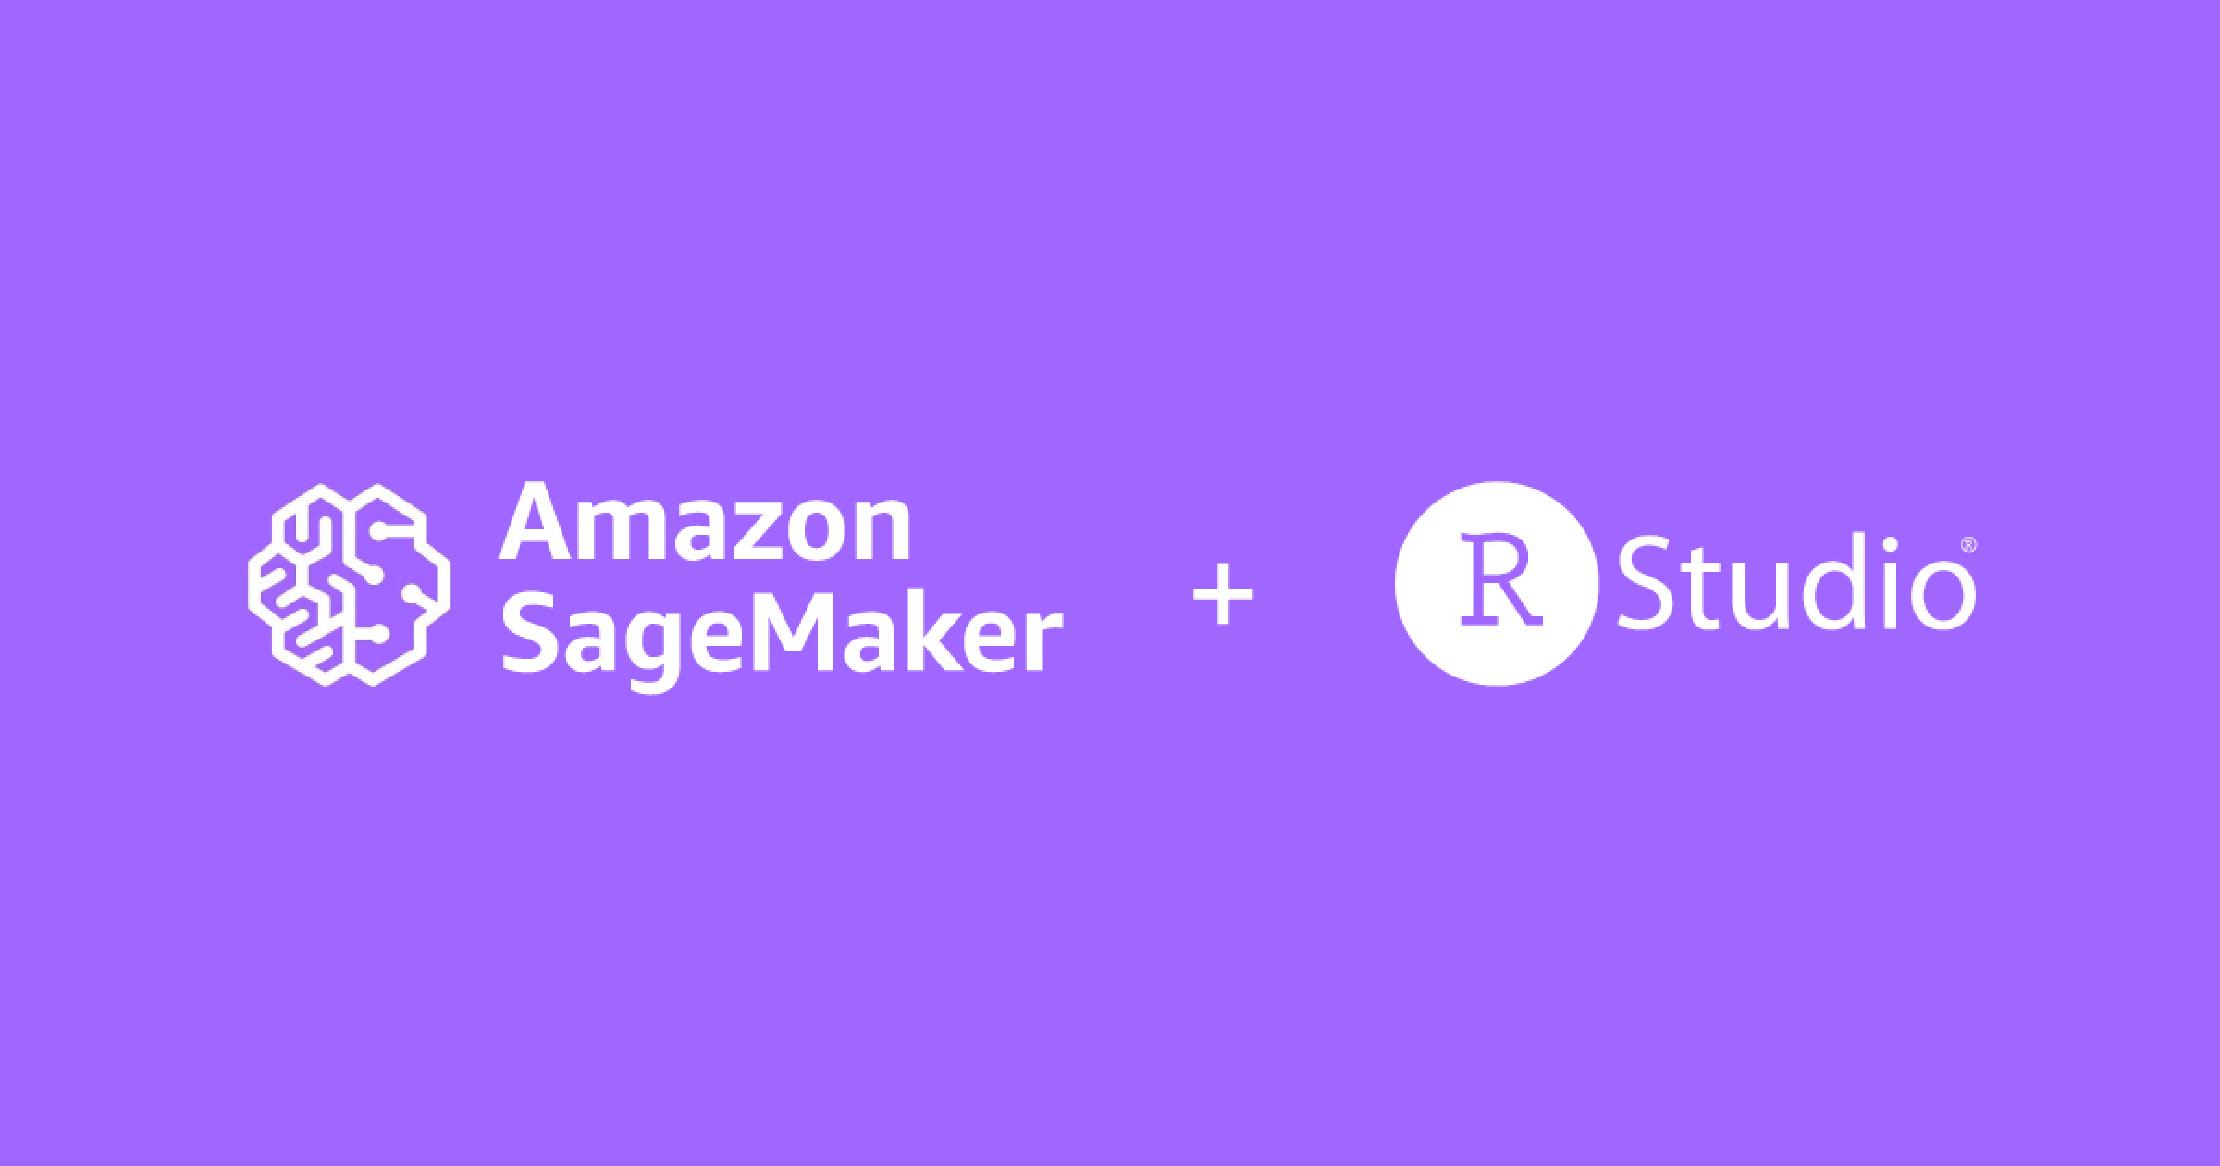 Thumbnail Amazon SageMaker icon, plus sign, and RStudio icon on a purple background